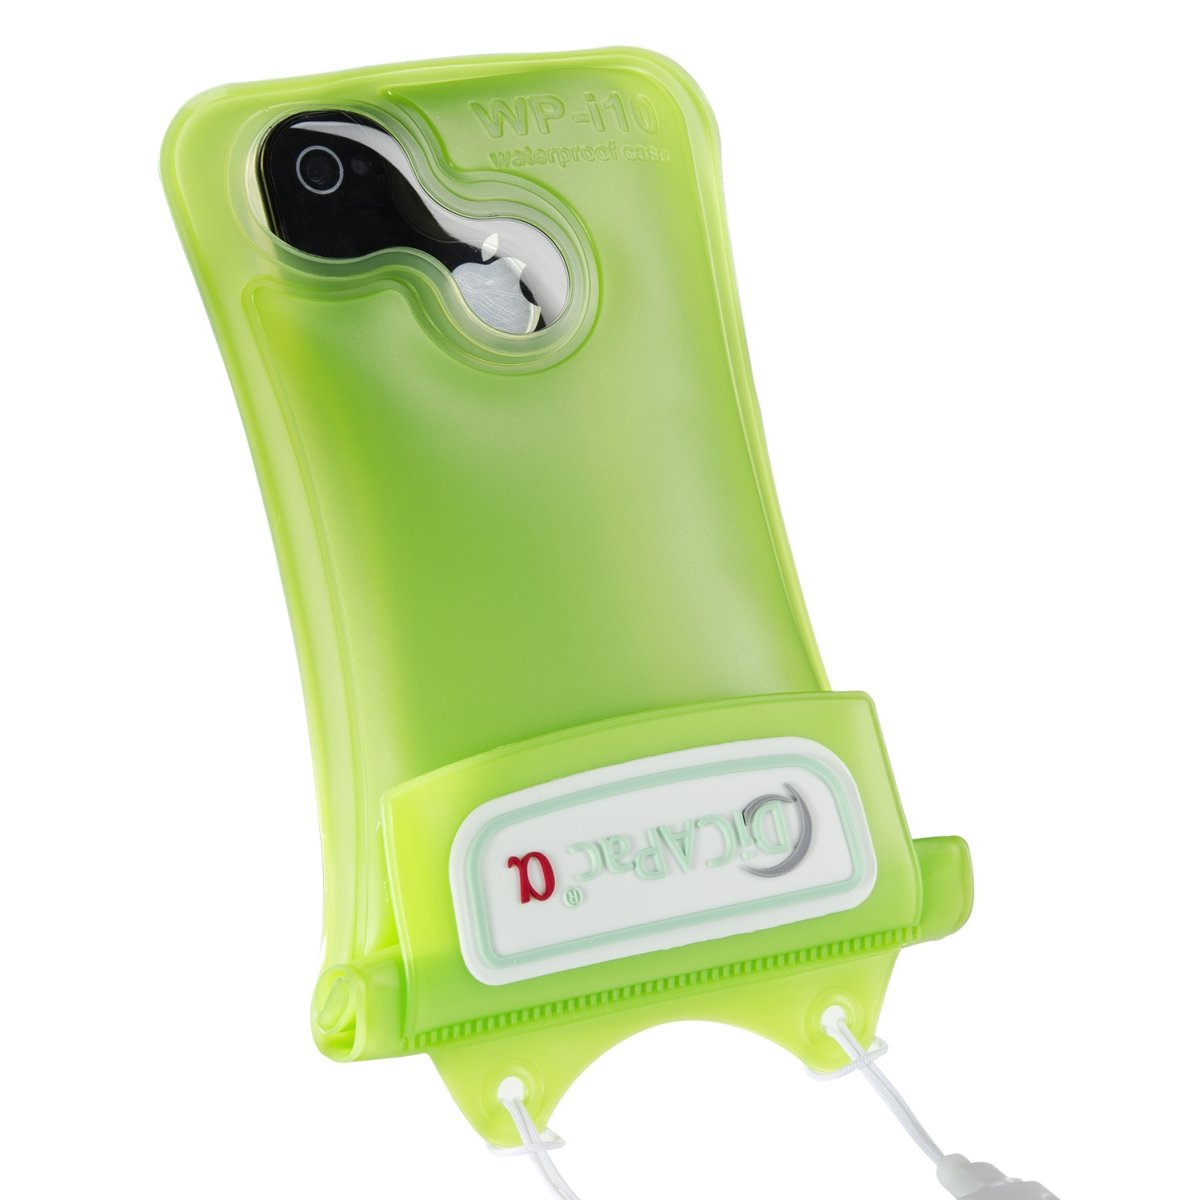 Dicapac USA Inc. WPi10 Waterproof Case for iPhone 1 Pack Retail Packaging Green